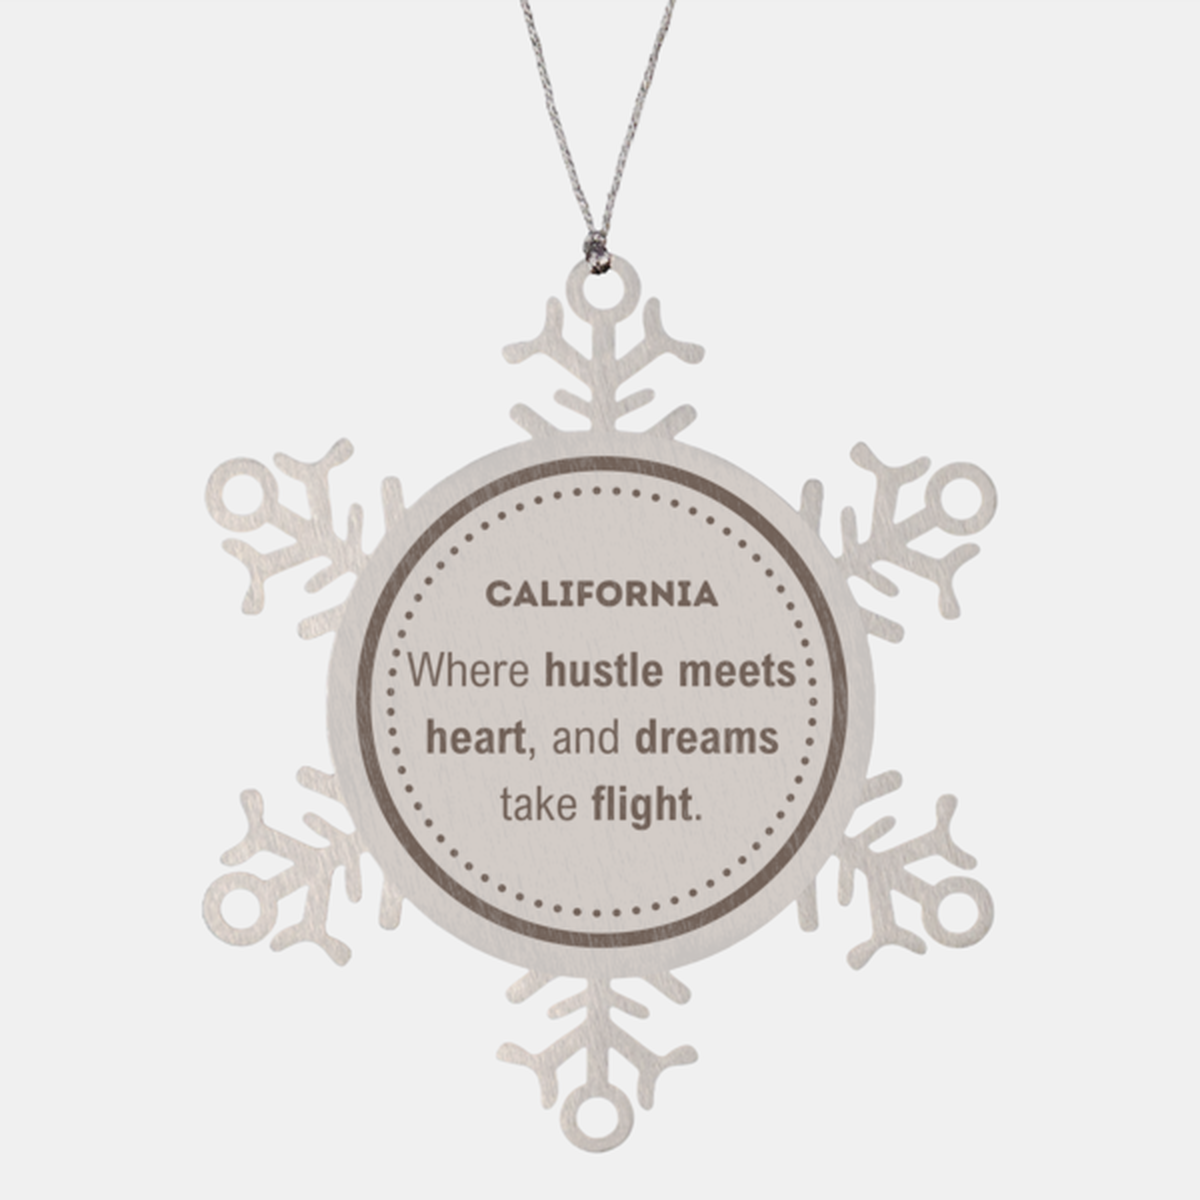 California: Where hustle meets heart, and dreams take flight, California Ornament Gifts, Proud California Christmas California Snowflake Ornament, California State People, Men, Women, Friends